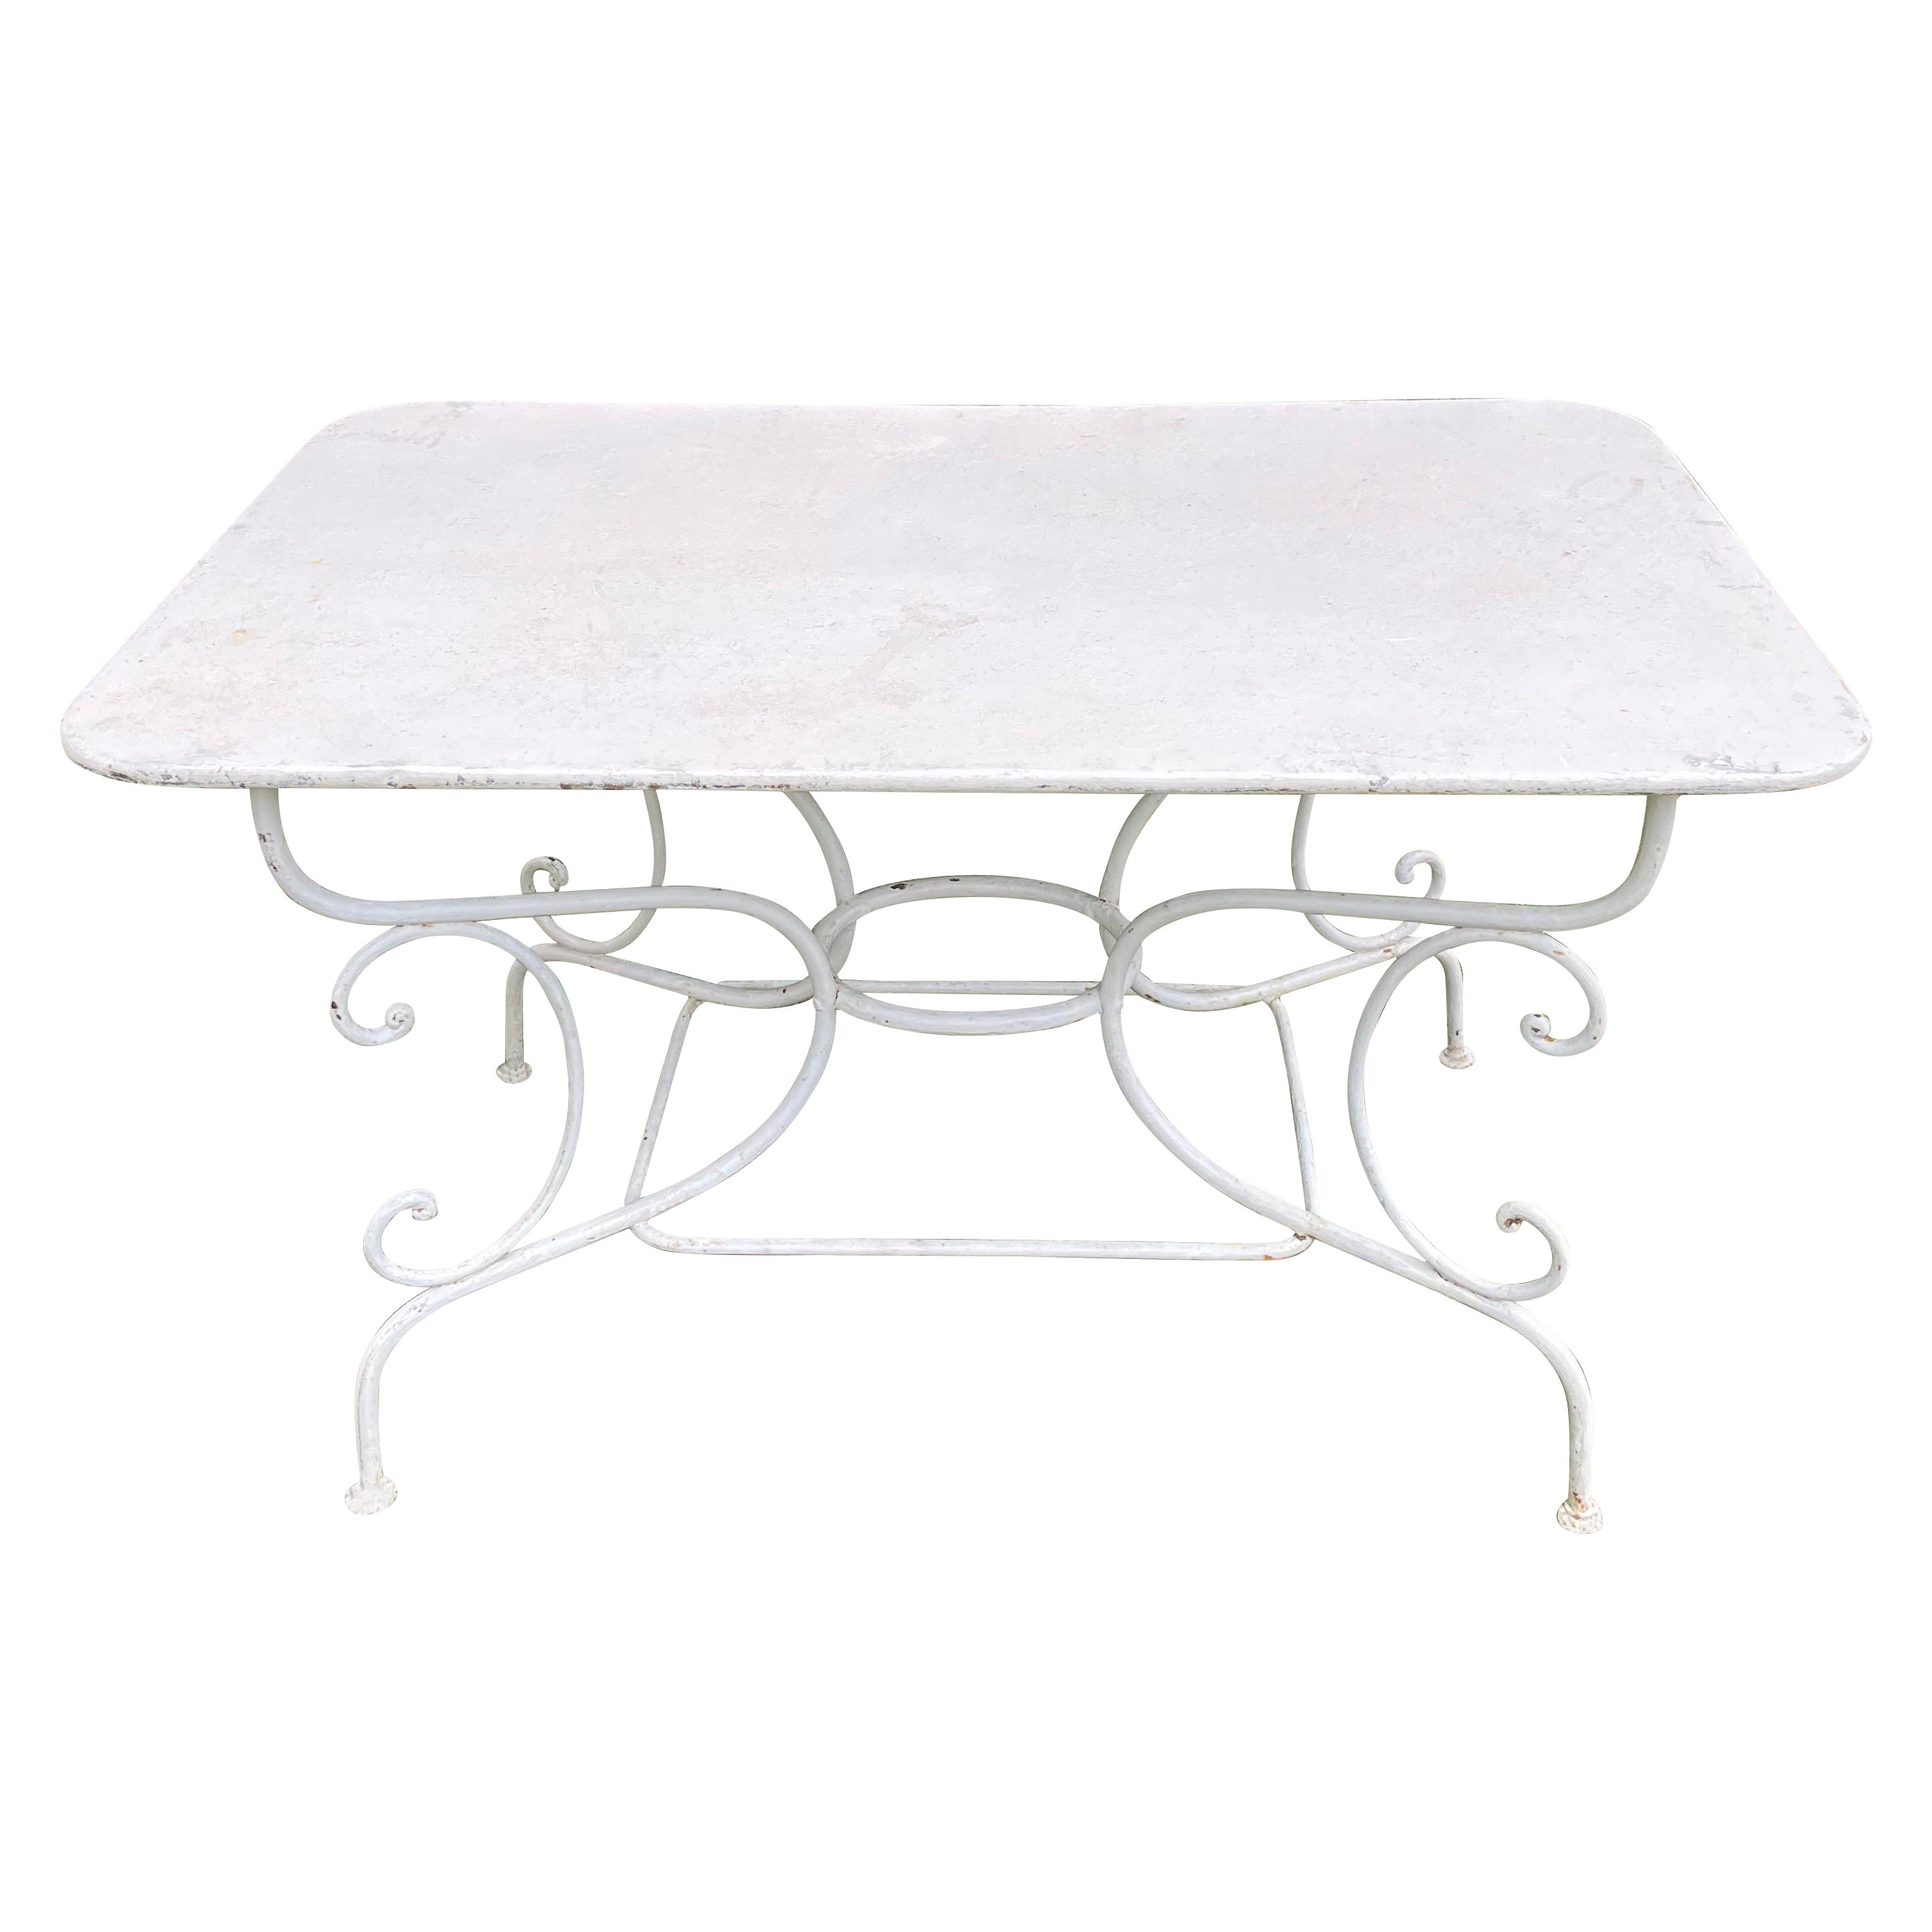 Late 19th C French Wrought Iron Dining Table For Sale